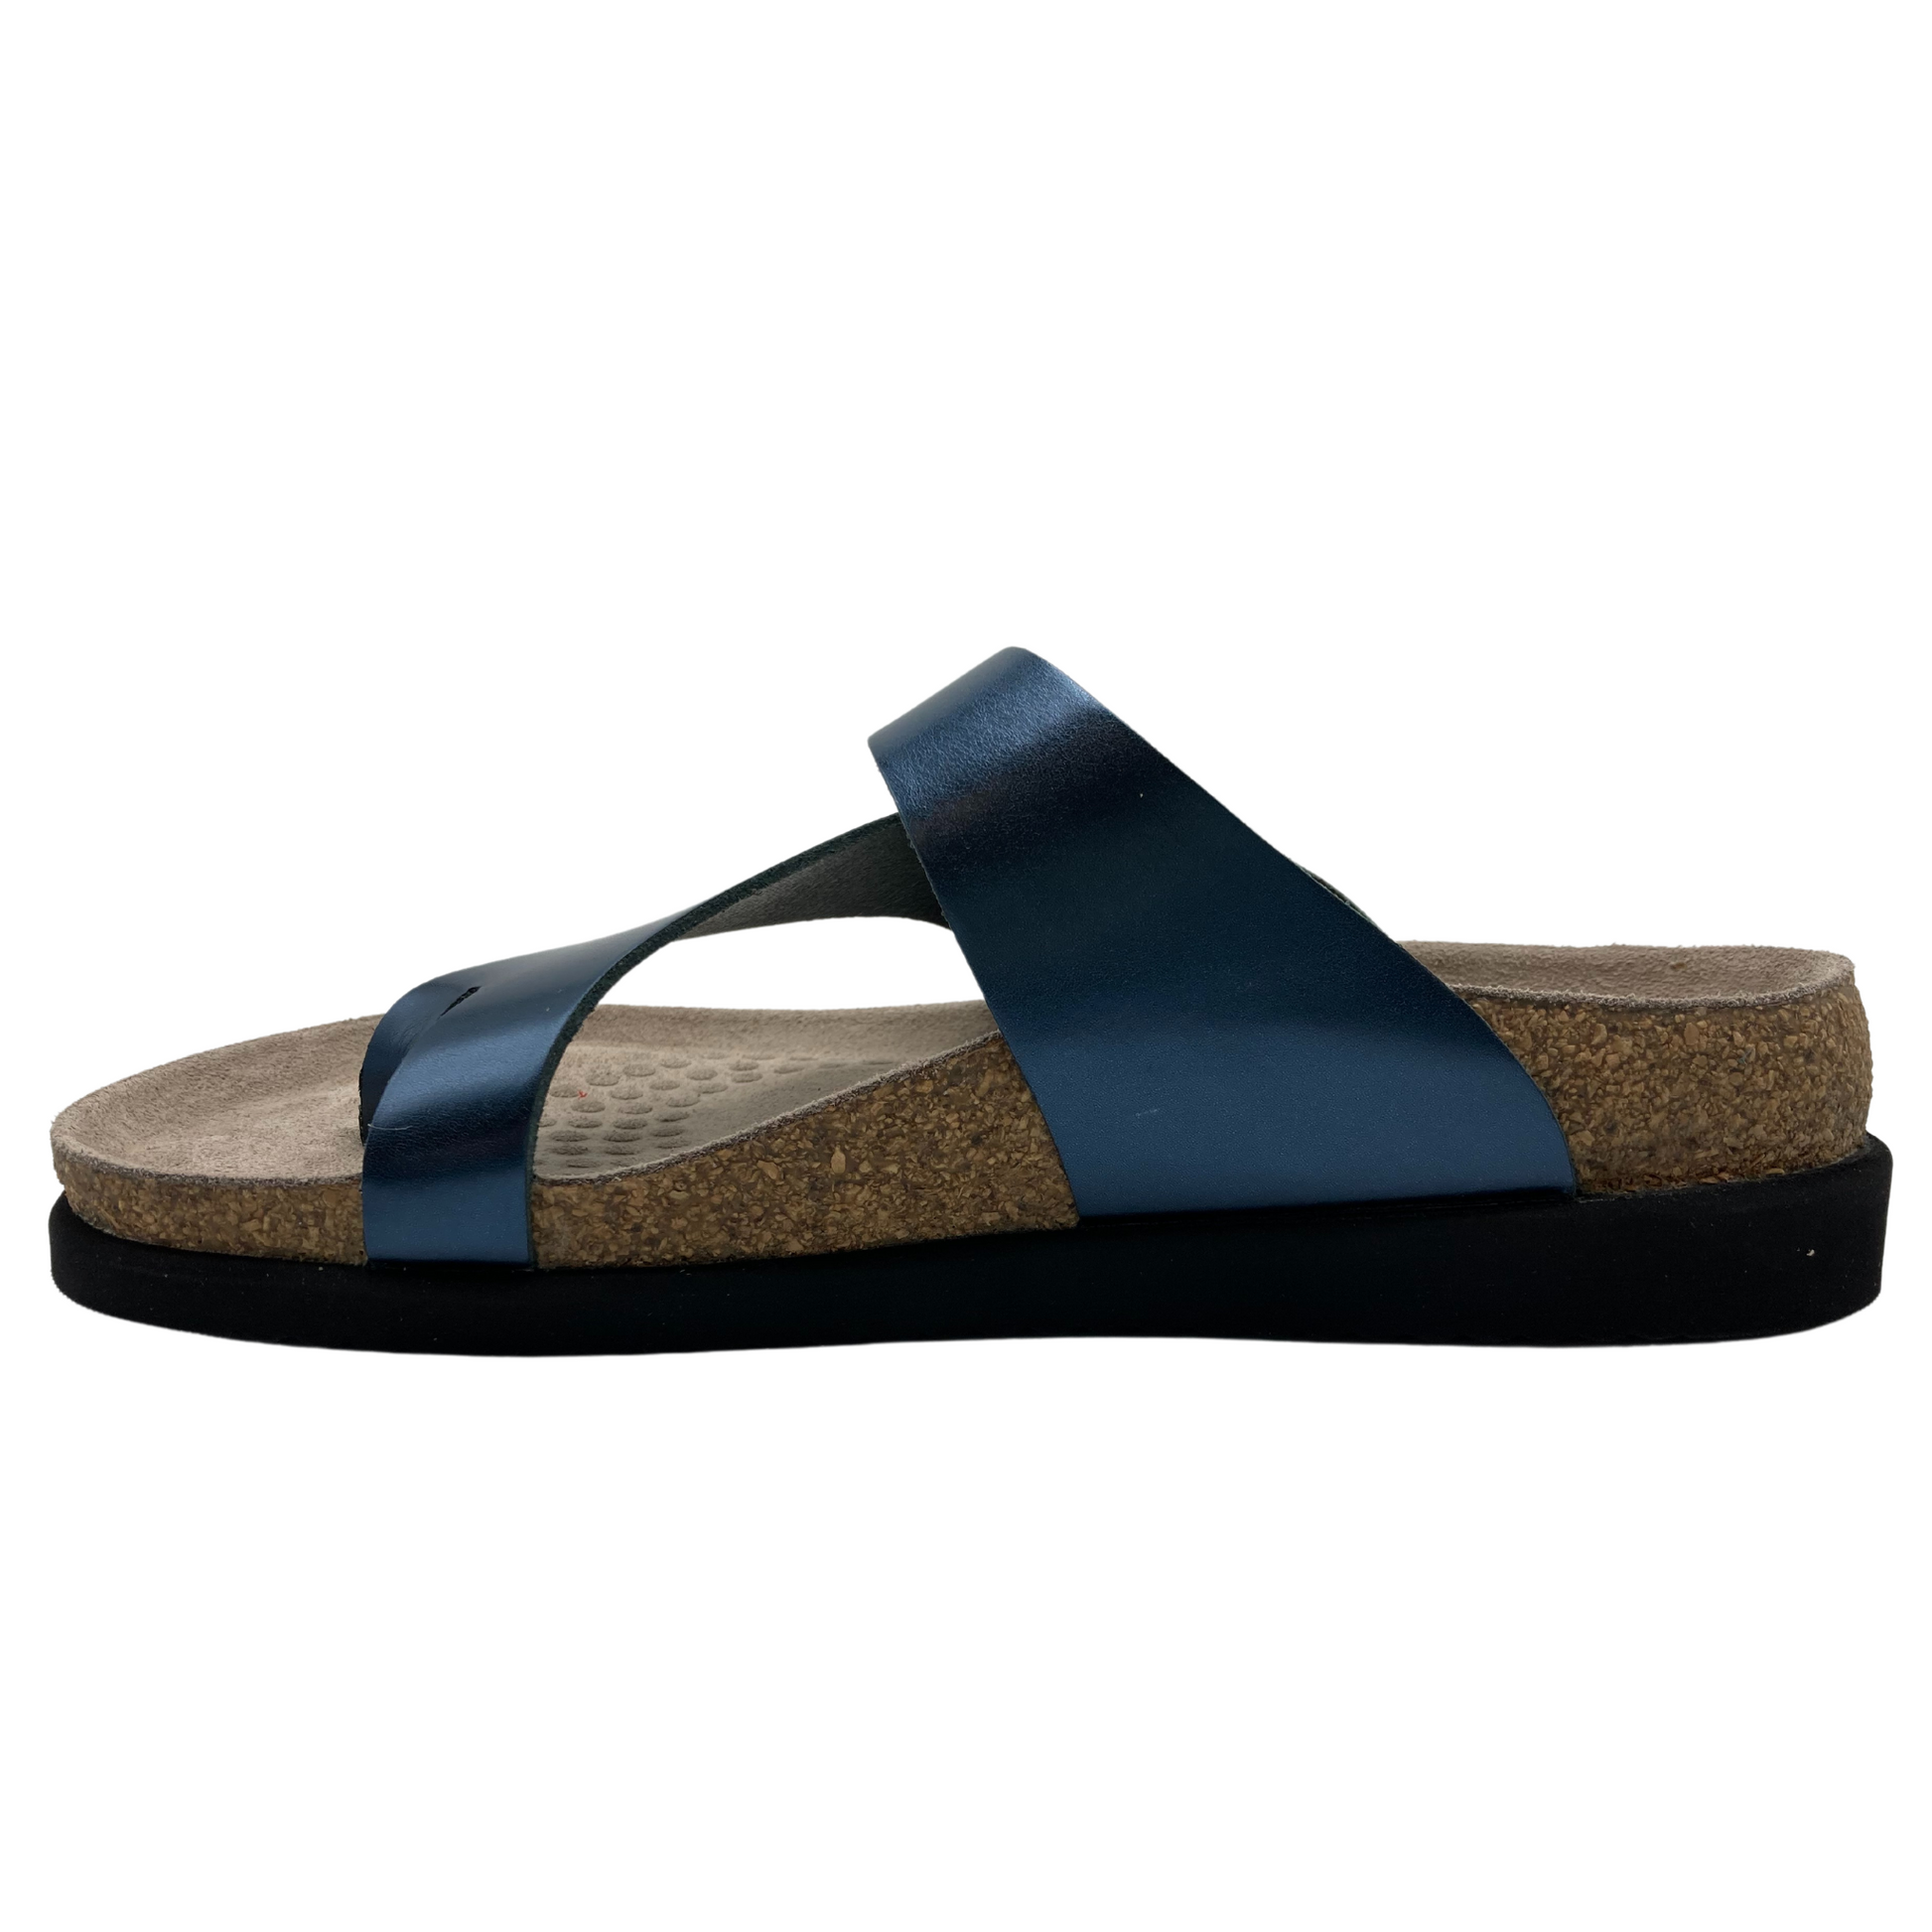 The inner profile view of the right sandal. Blue leather straps with a black sole and cork contoured footbed.